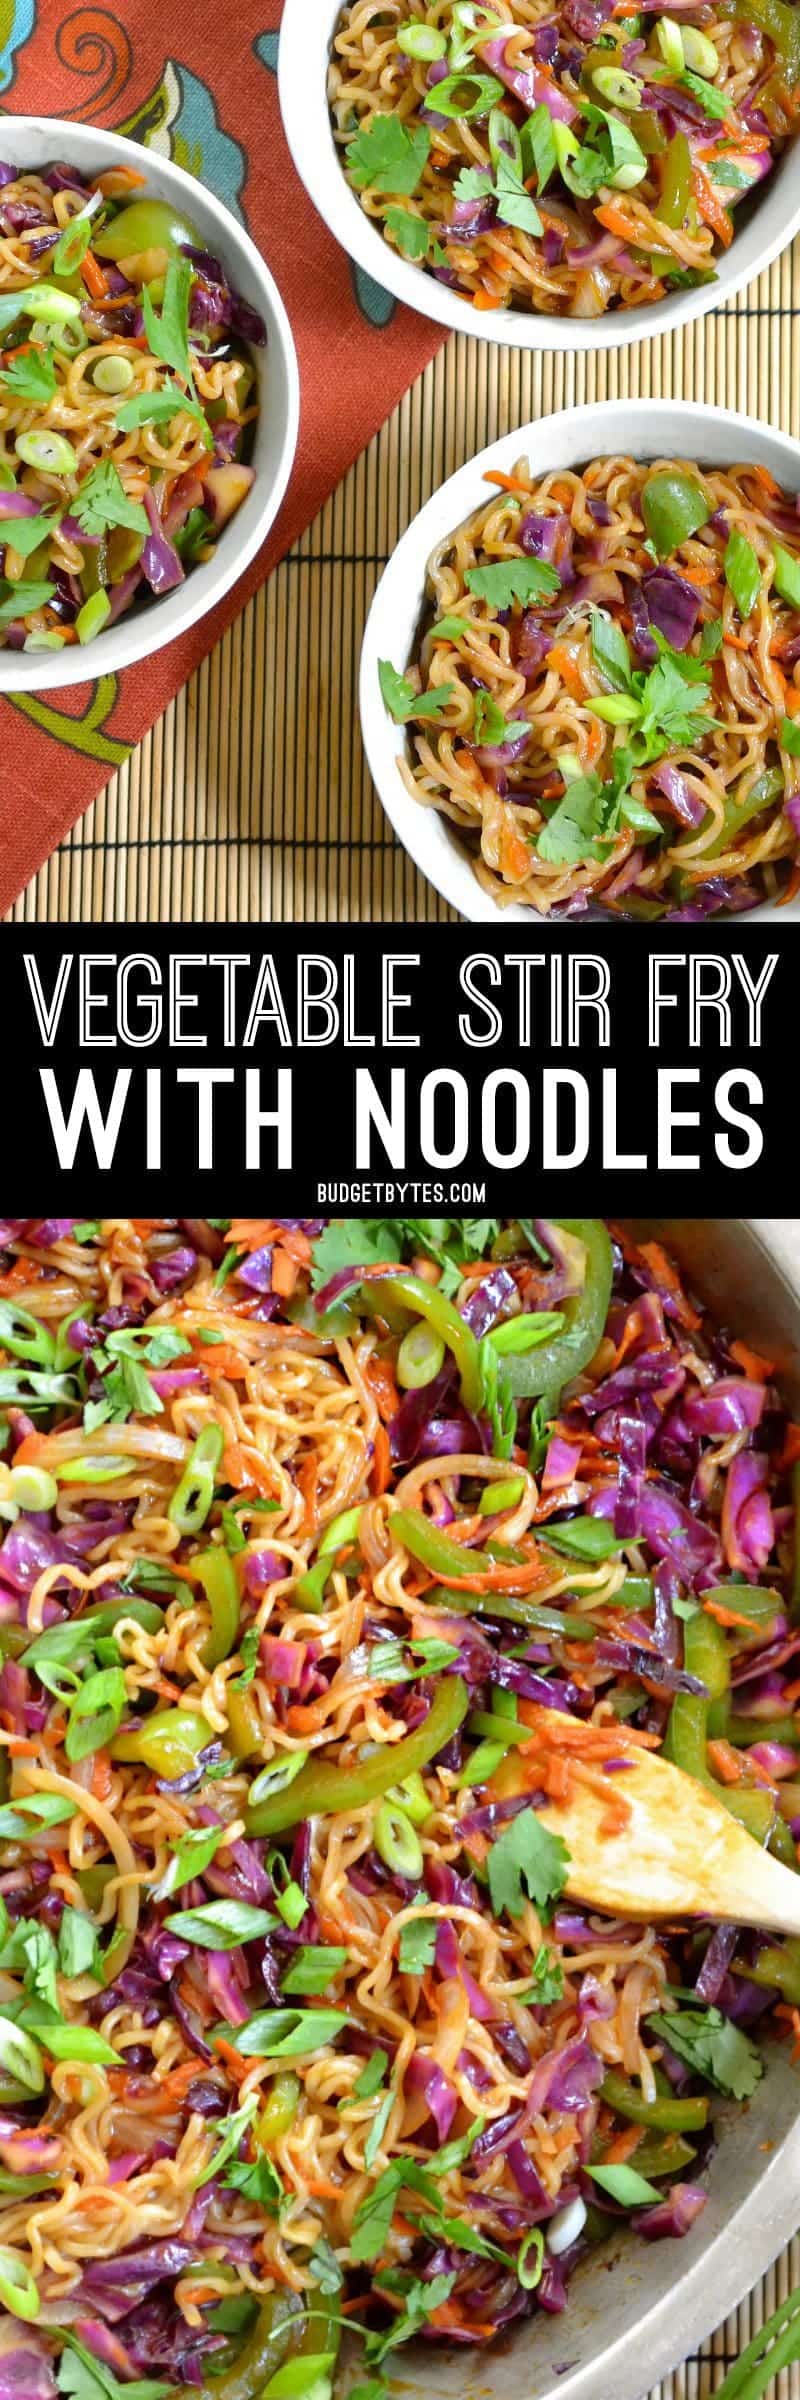 This colorful vegetable stir fry with noodles is packed with vegetables and drenched in a salty sweet sauce. Fast, easy, and customizable. BudgetBytes.com